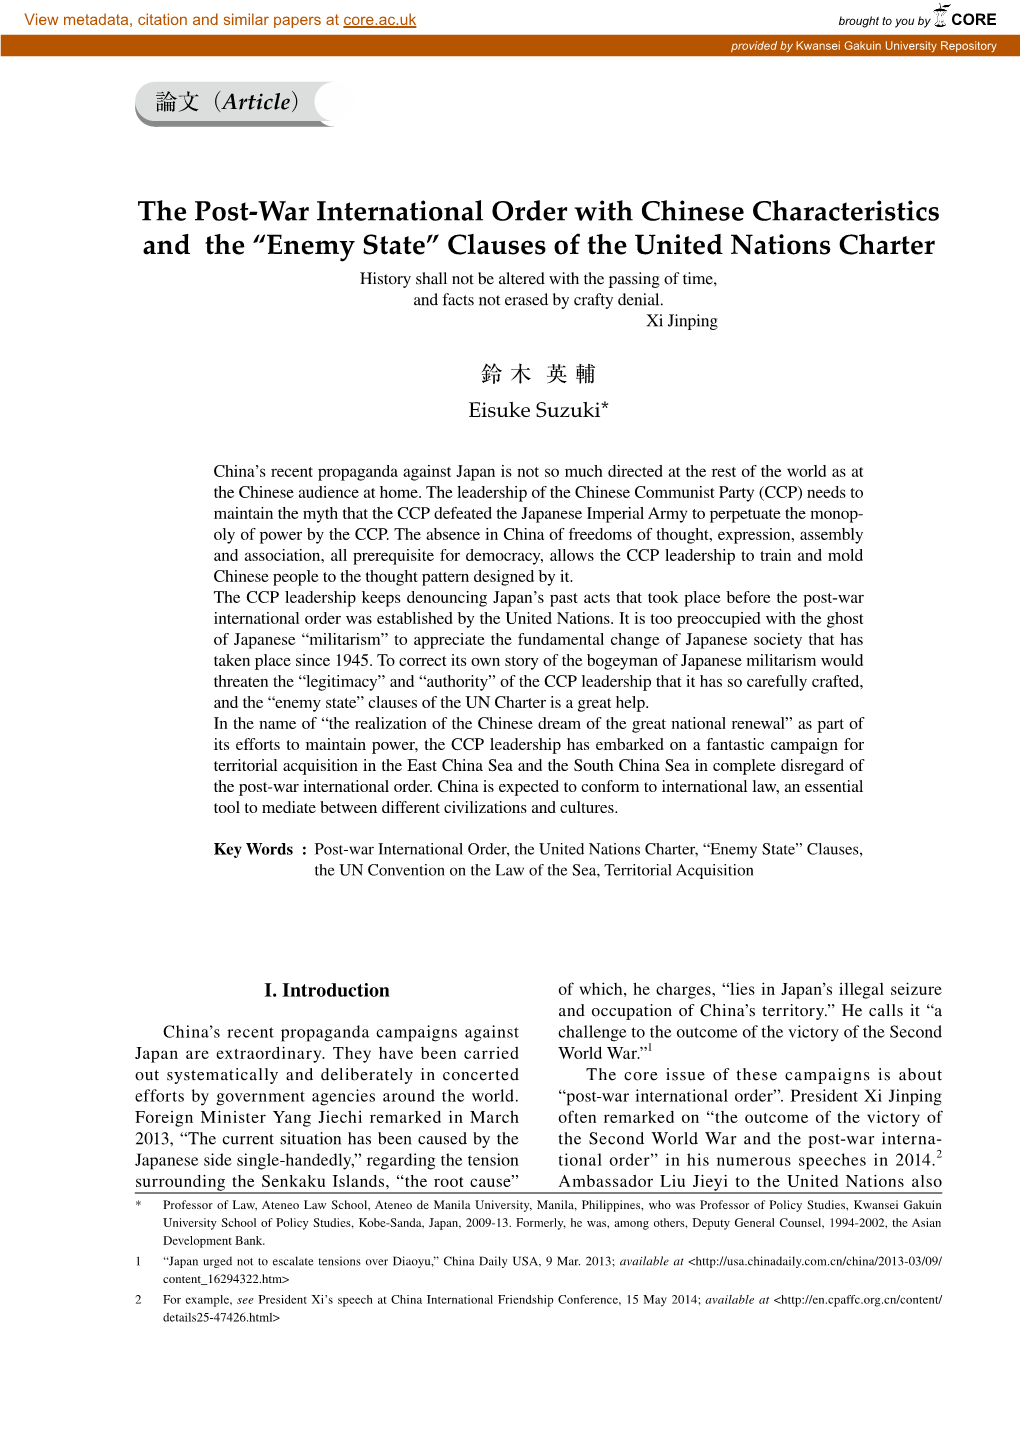 “Enemy State” Clauses of the United Nations Charter History Shall Not Be Altered with the Passing of Time, and Facts Not Erased by Crafty Denial